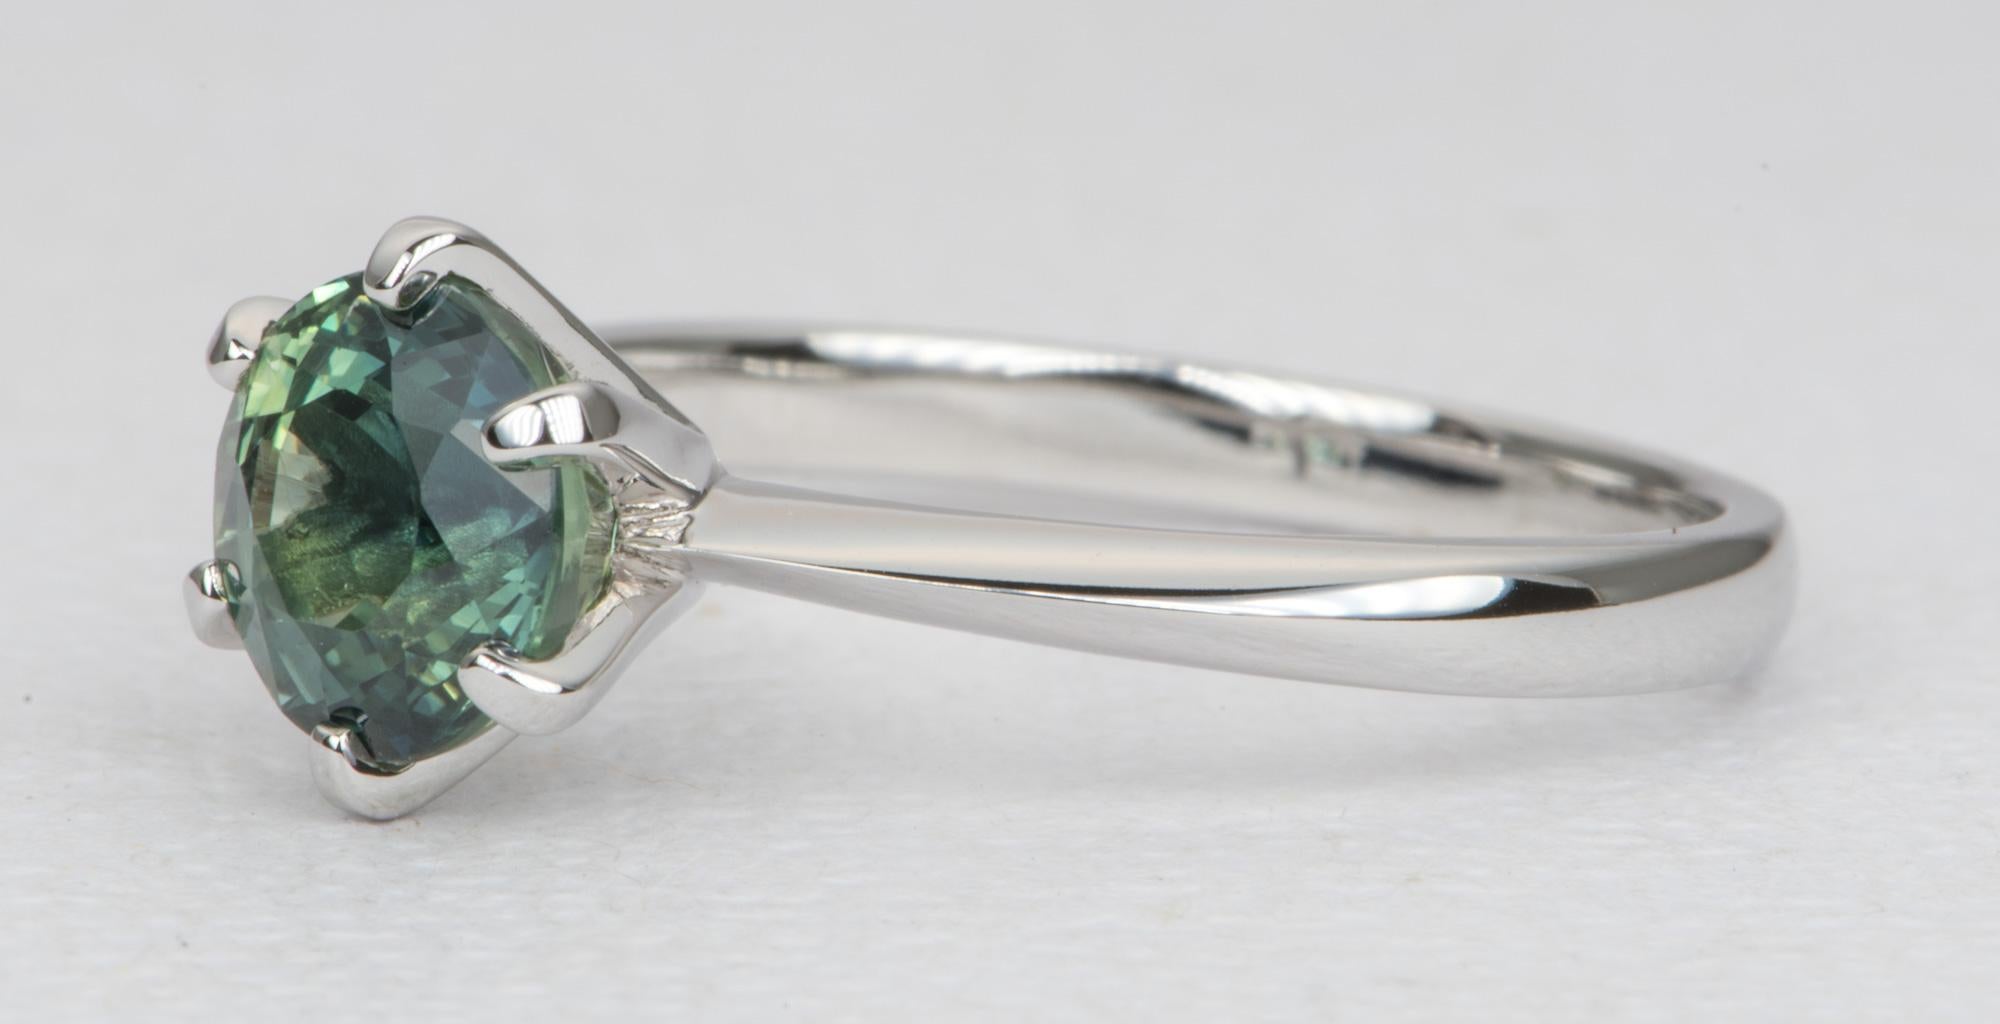 ♥  Solid 14K white gold ring set with a stunning blue green sapphire!
♥  The stone is securely set in a 6-prong setting, with a knife edge shank to further accentuate the beautiful center stone

♥  Ring Size: 6.25 (Free resizing)
♥  Band width: